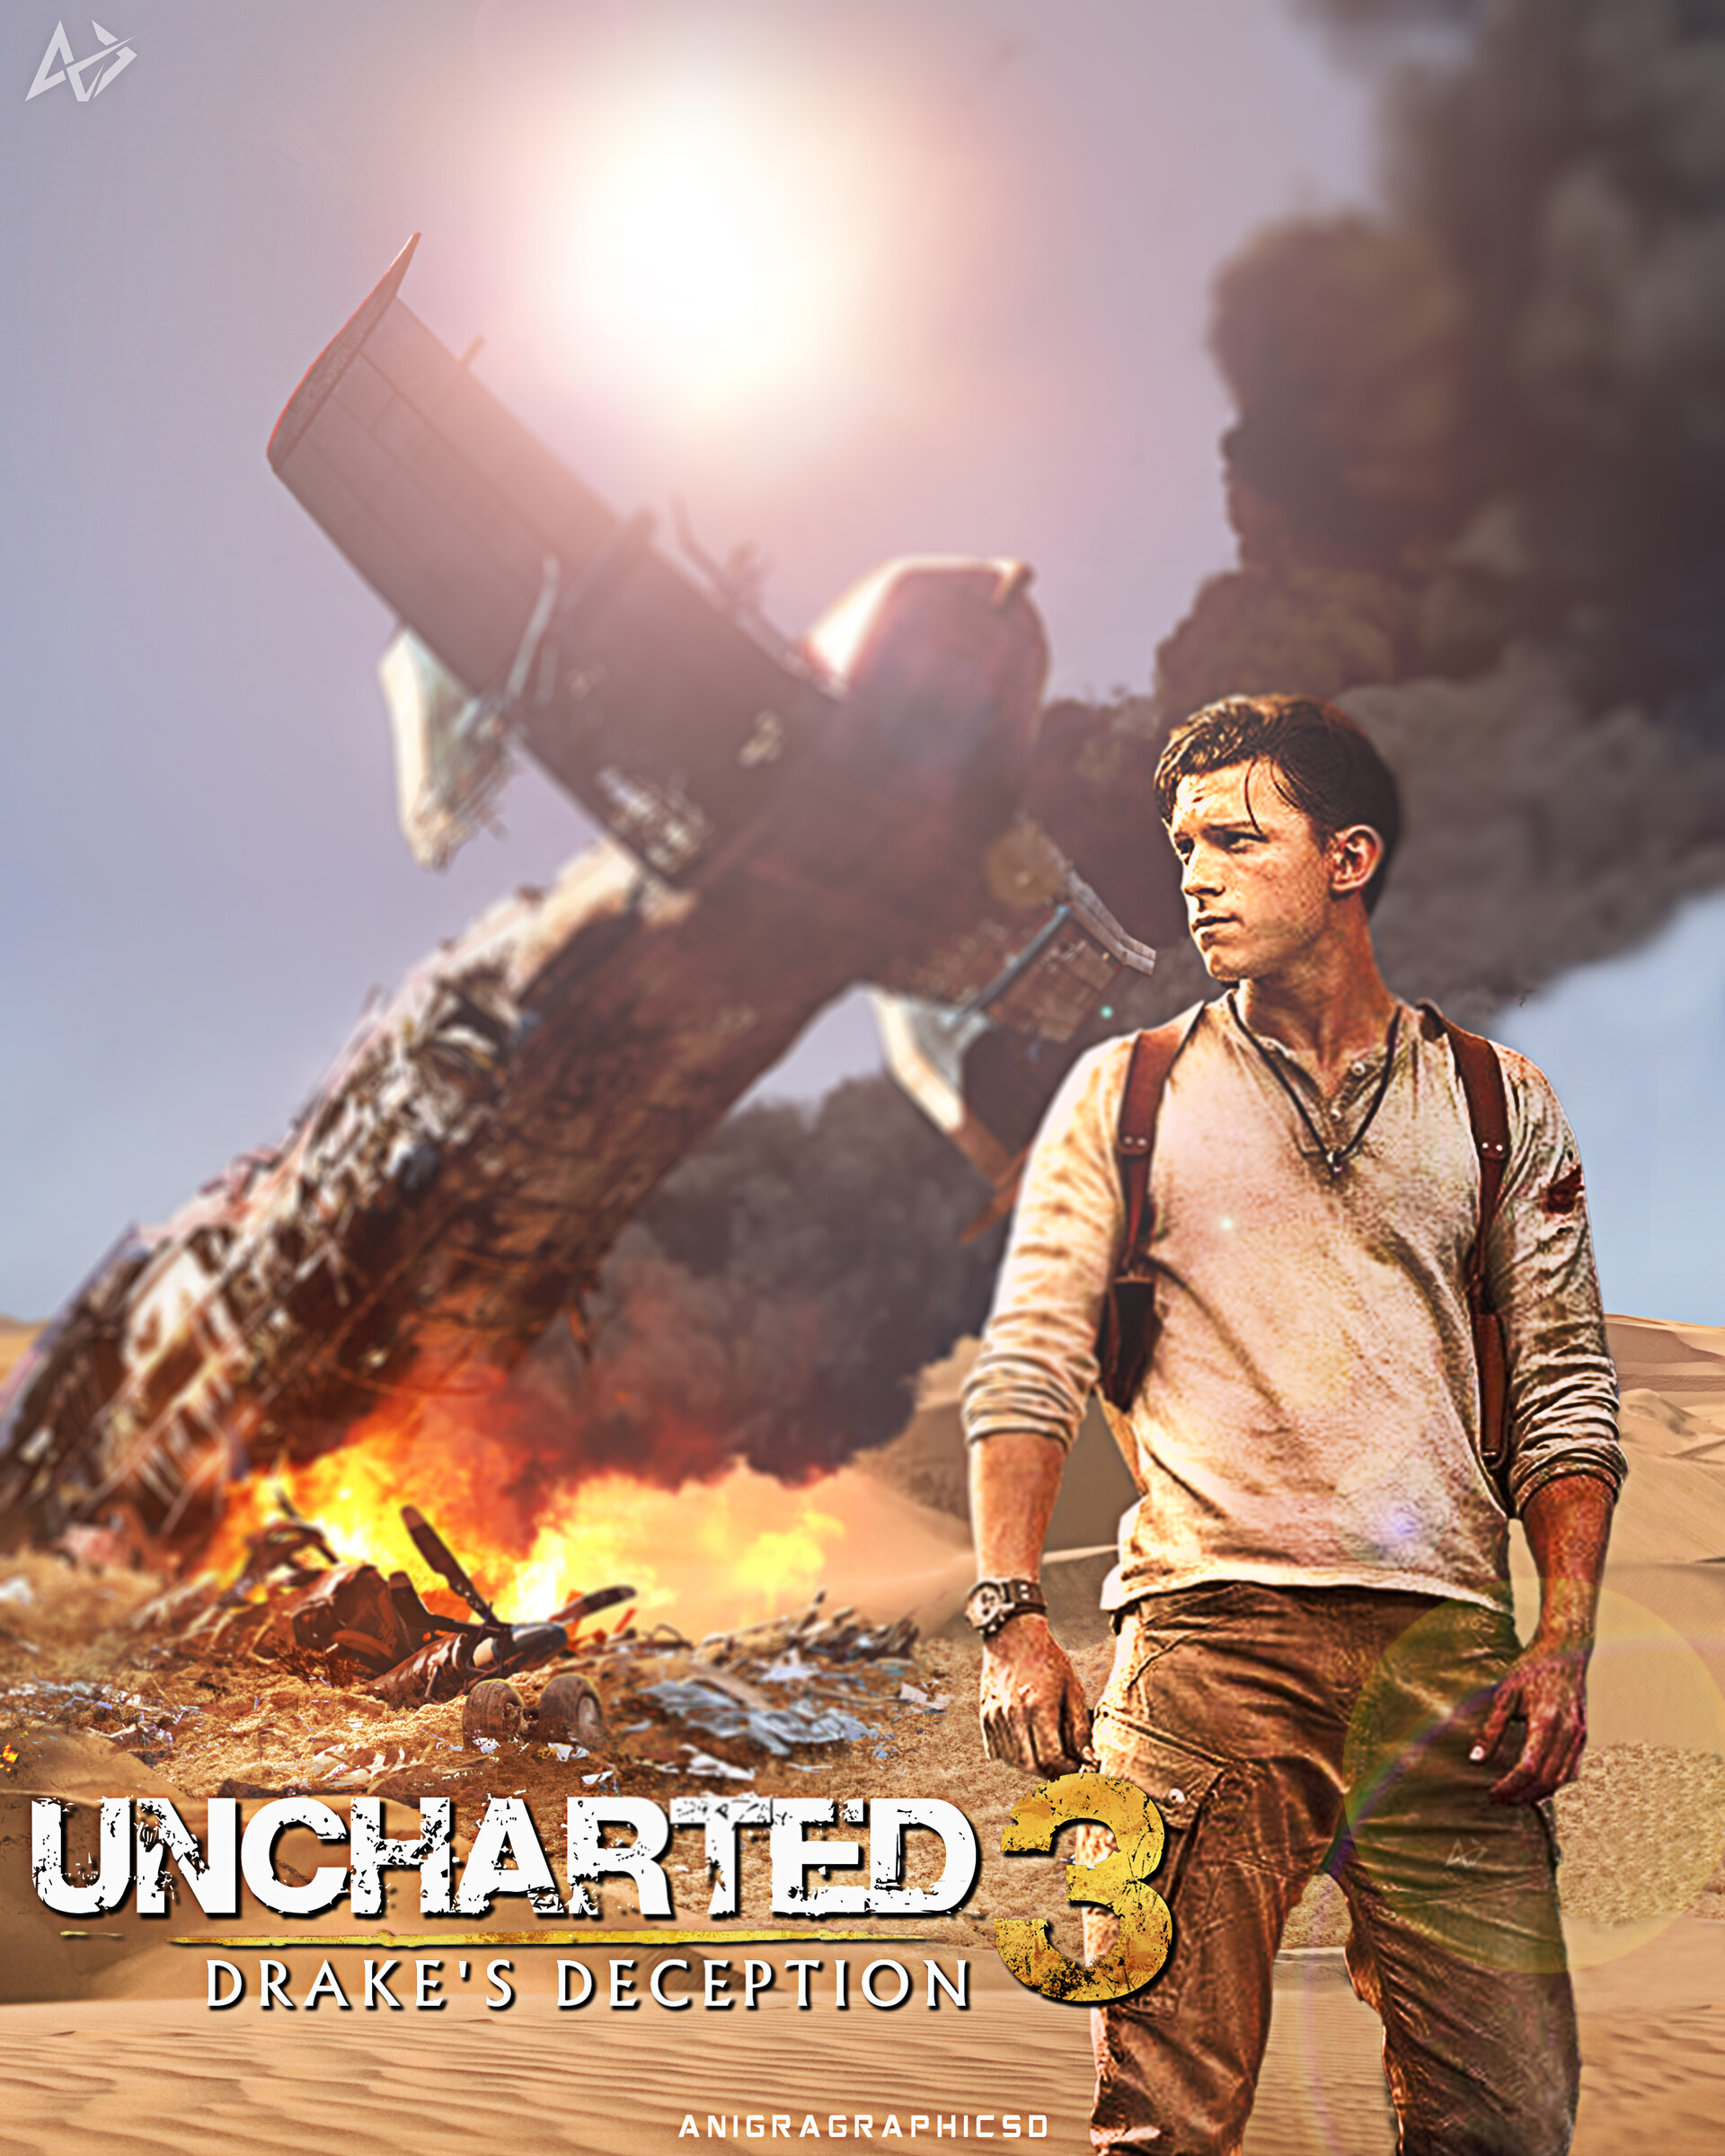 Uncharted 3 - Famous Plane Scene Poster for Sale by UnchartedStore